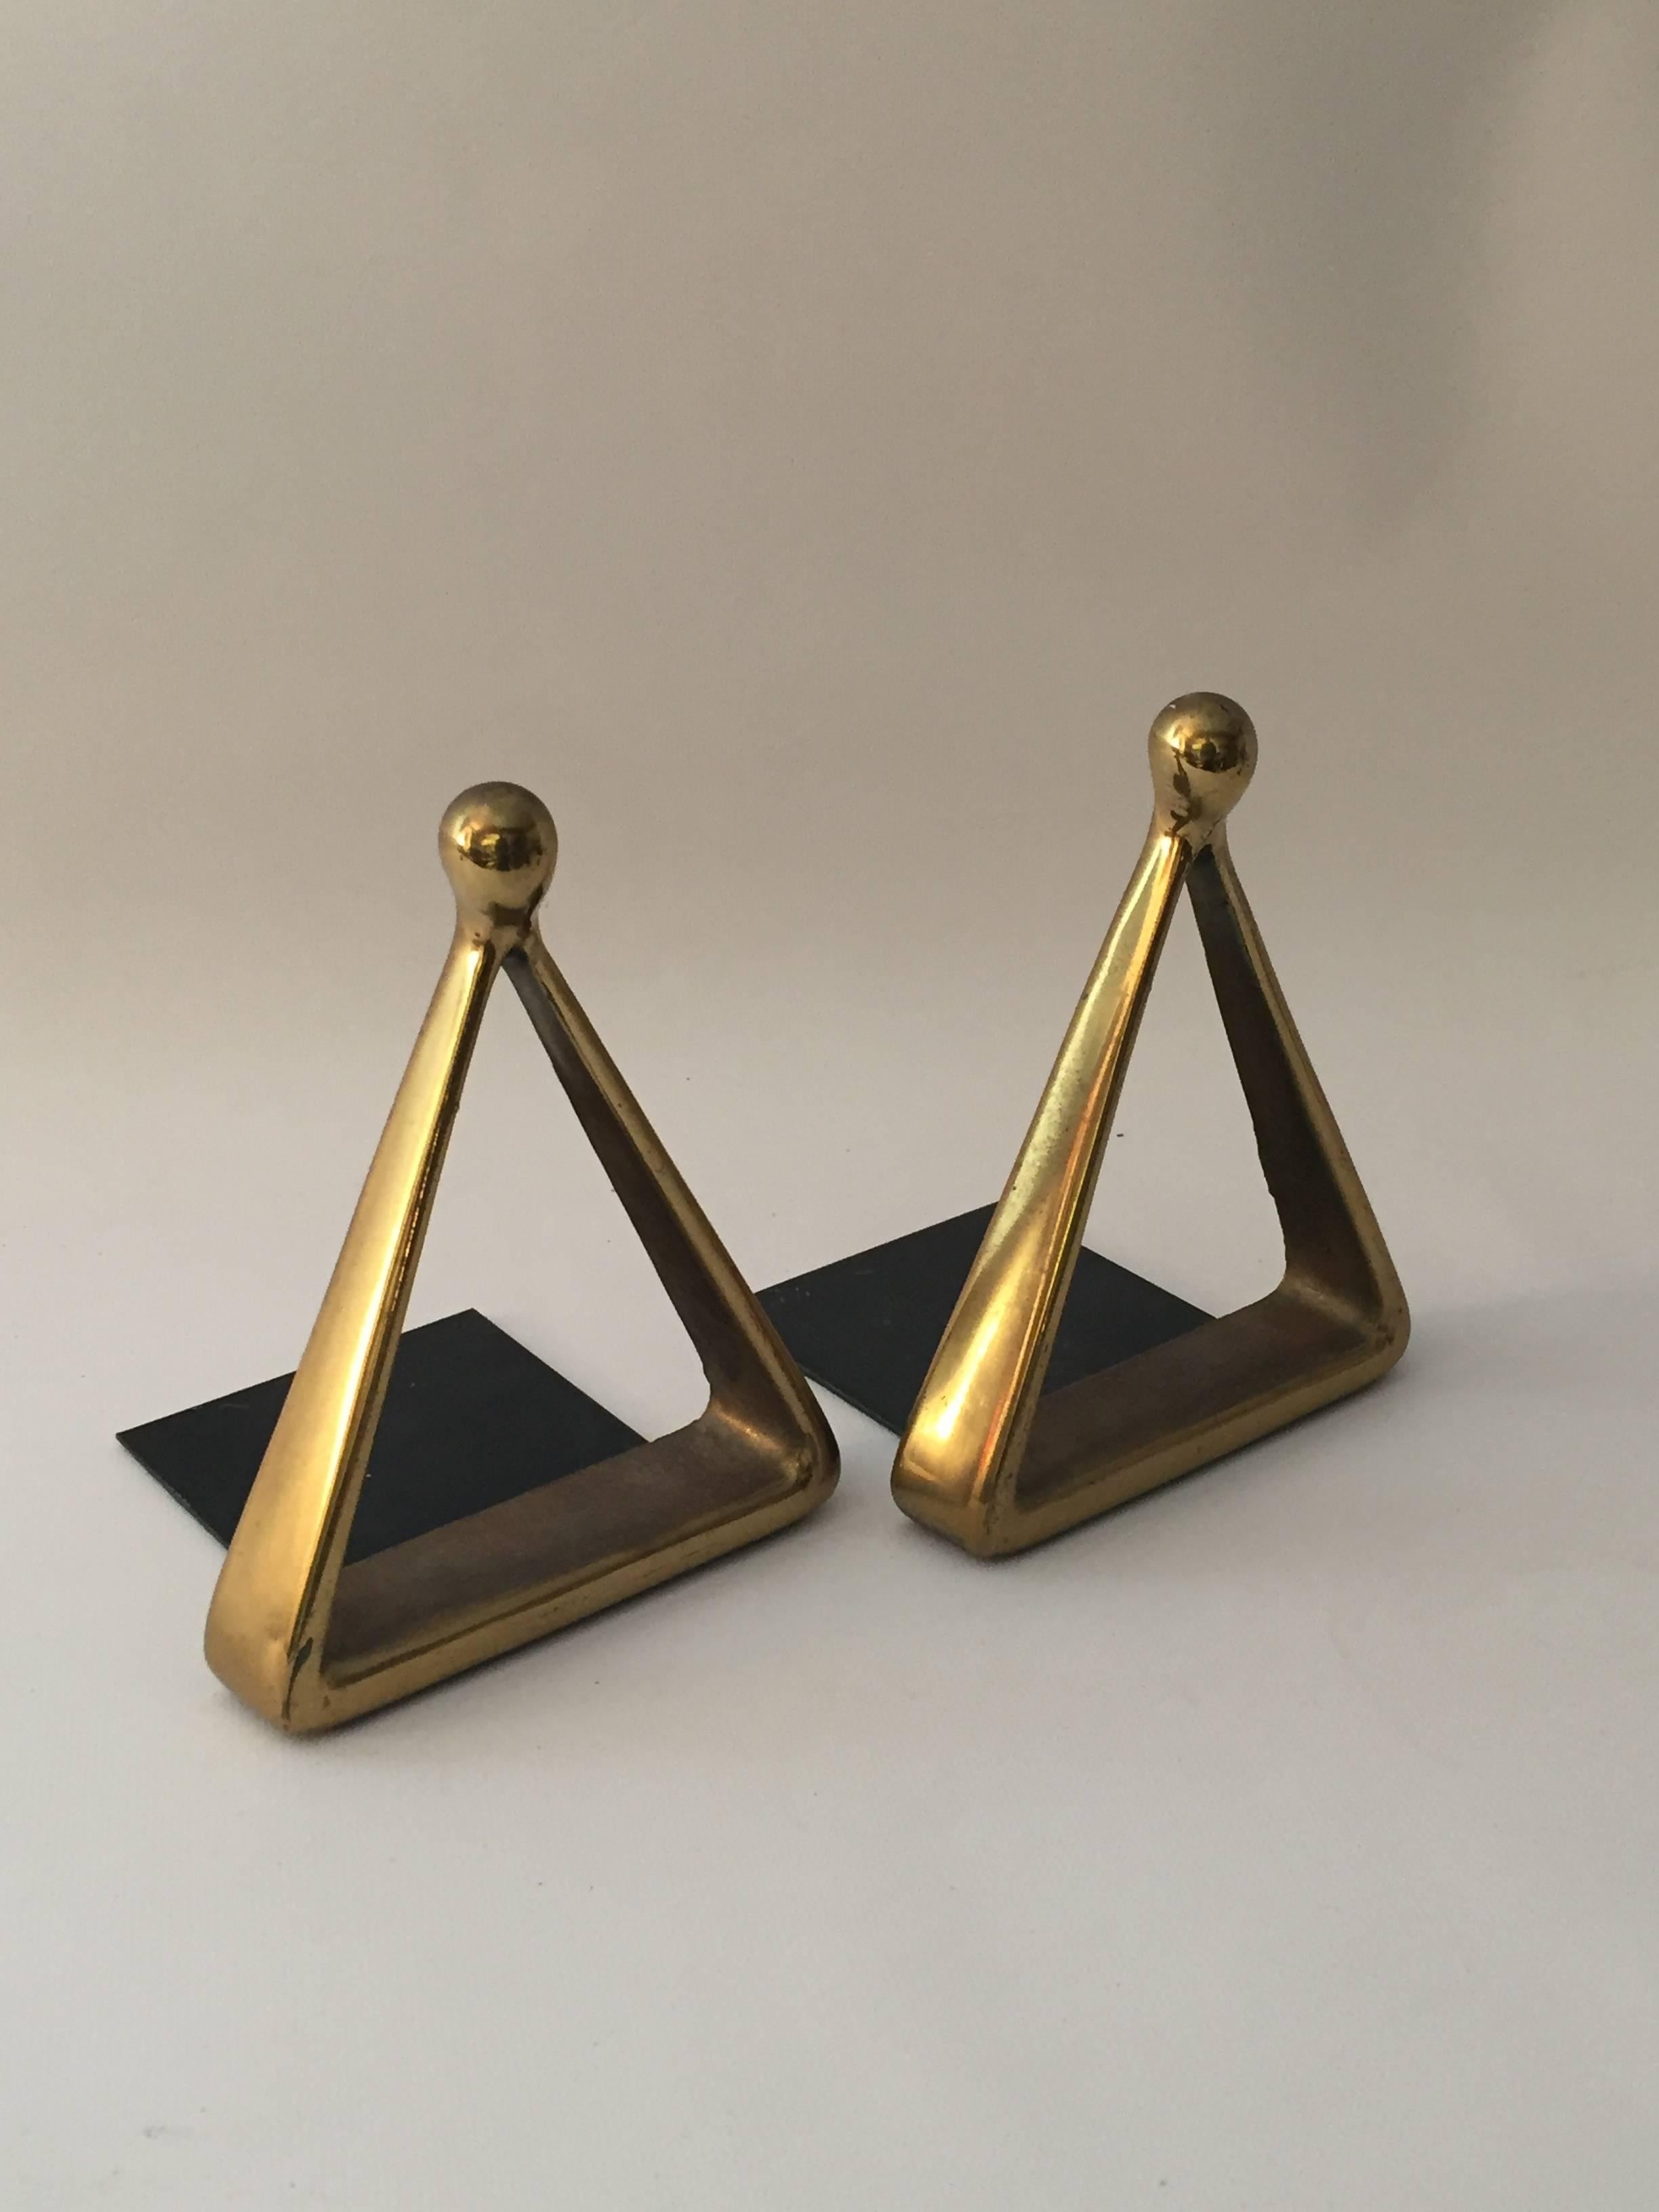 Sculptural and beautiful brass-plated bookends designed by Ben Seibel for Raymor. Signed raised Jenfred Ware mark and complete paper label on bottom. Felted bottoms.
 